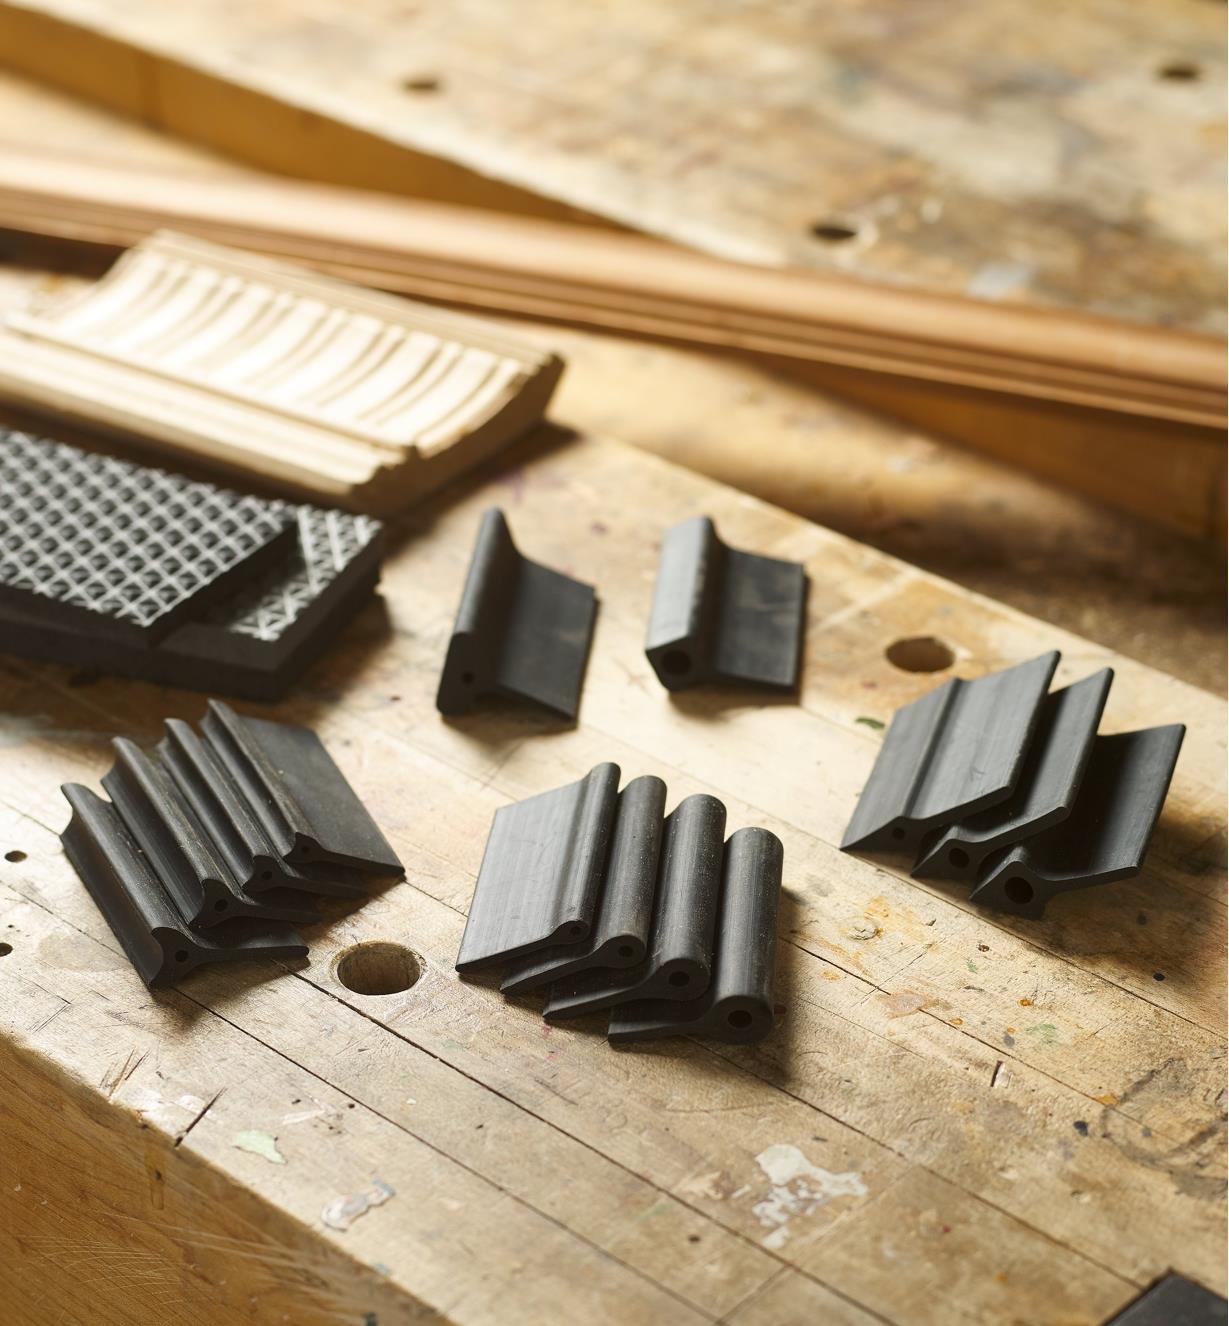 A set of 15 contour sanding grips of various profiles on a workbench